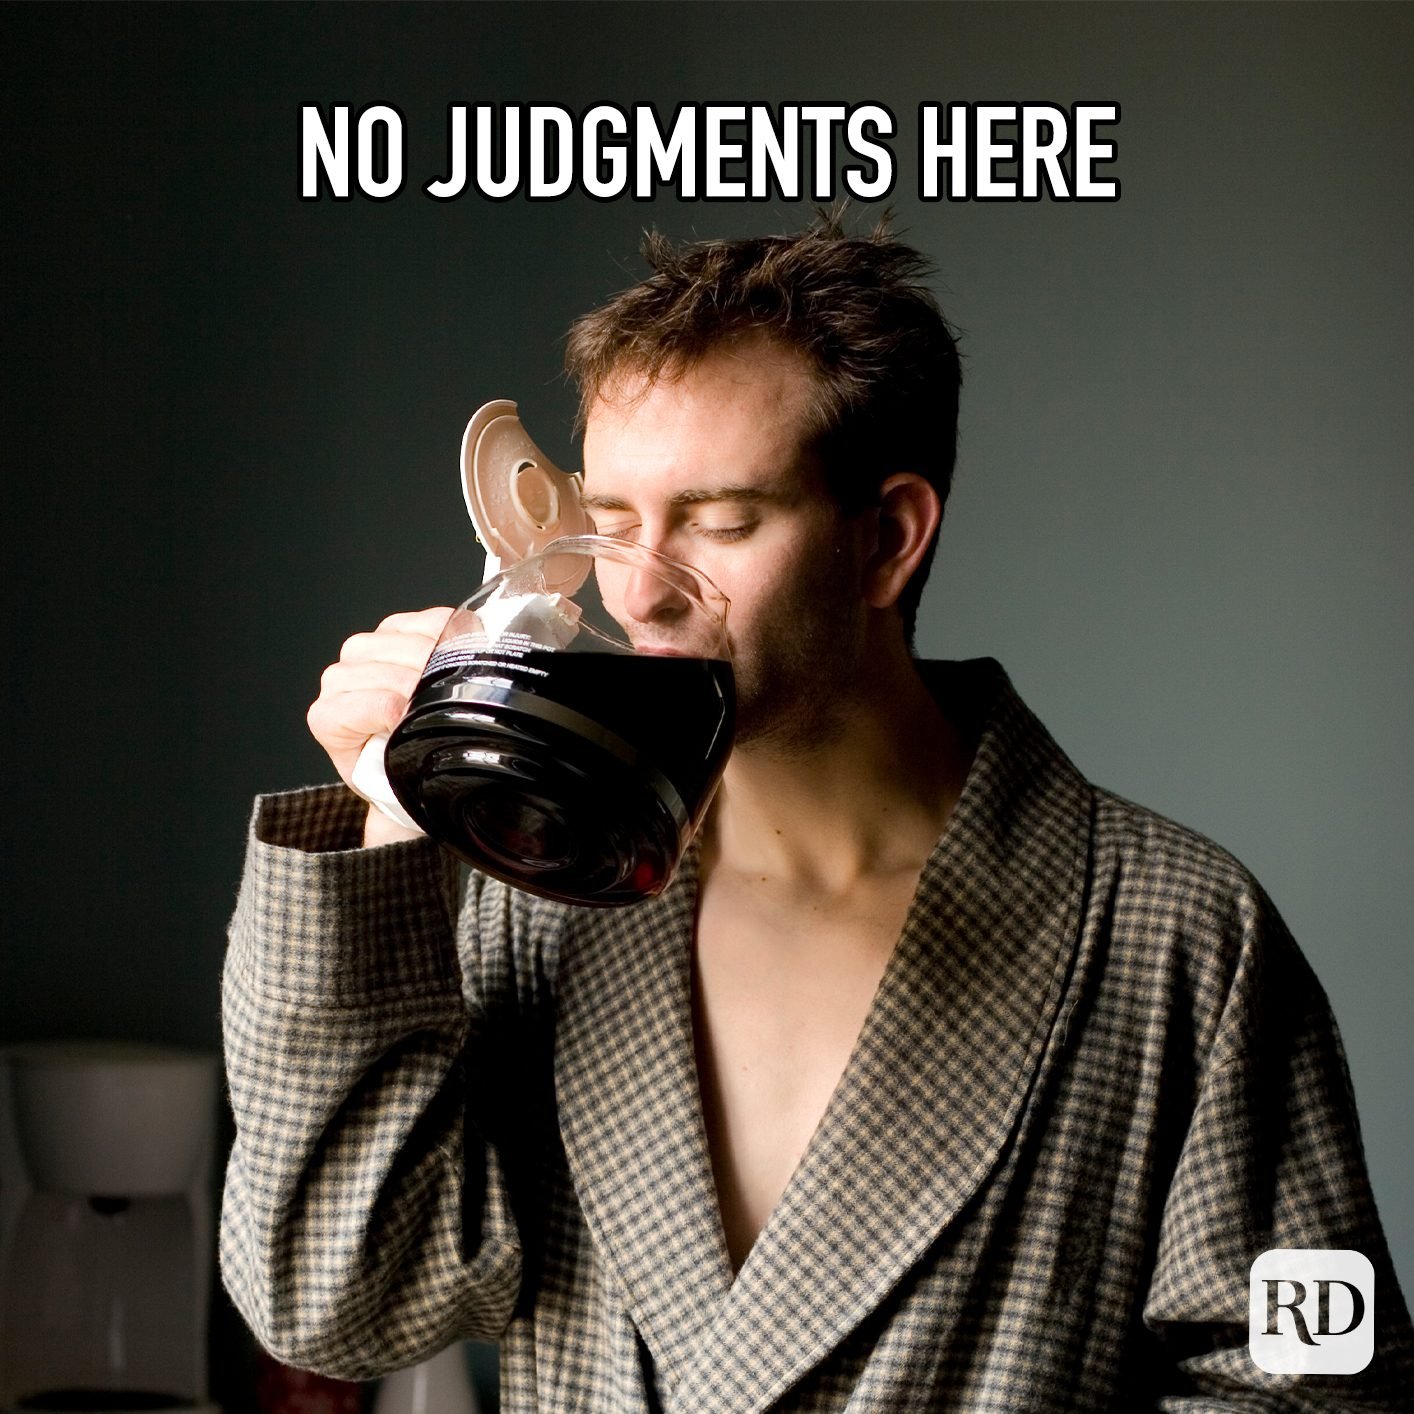 No Judgements Here meme text over image of man in robe drinking coffee from coffee pot